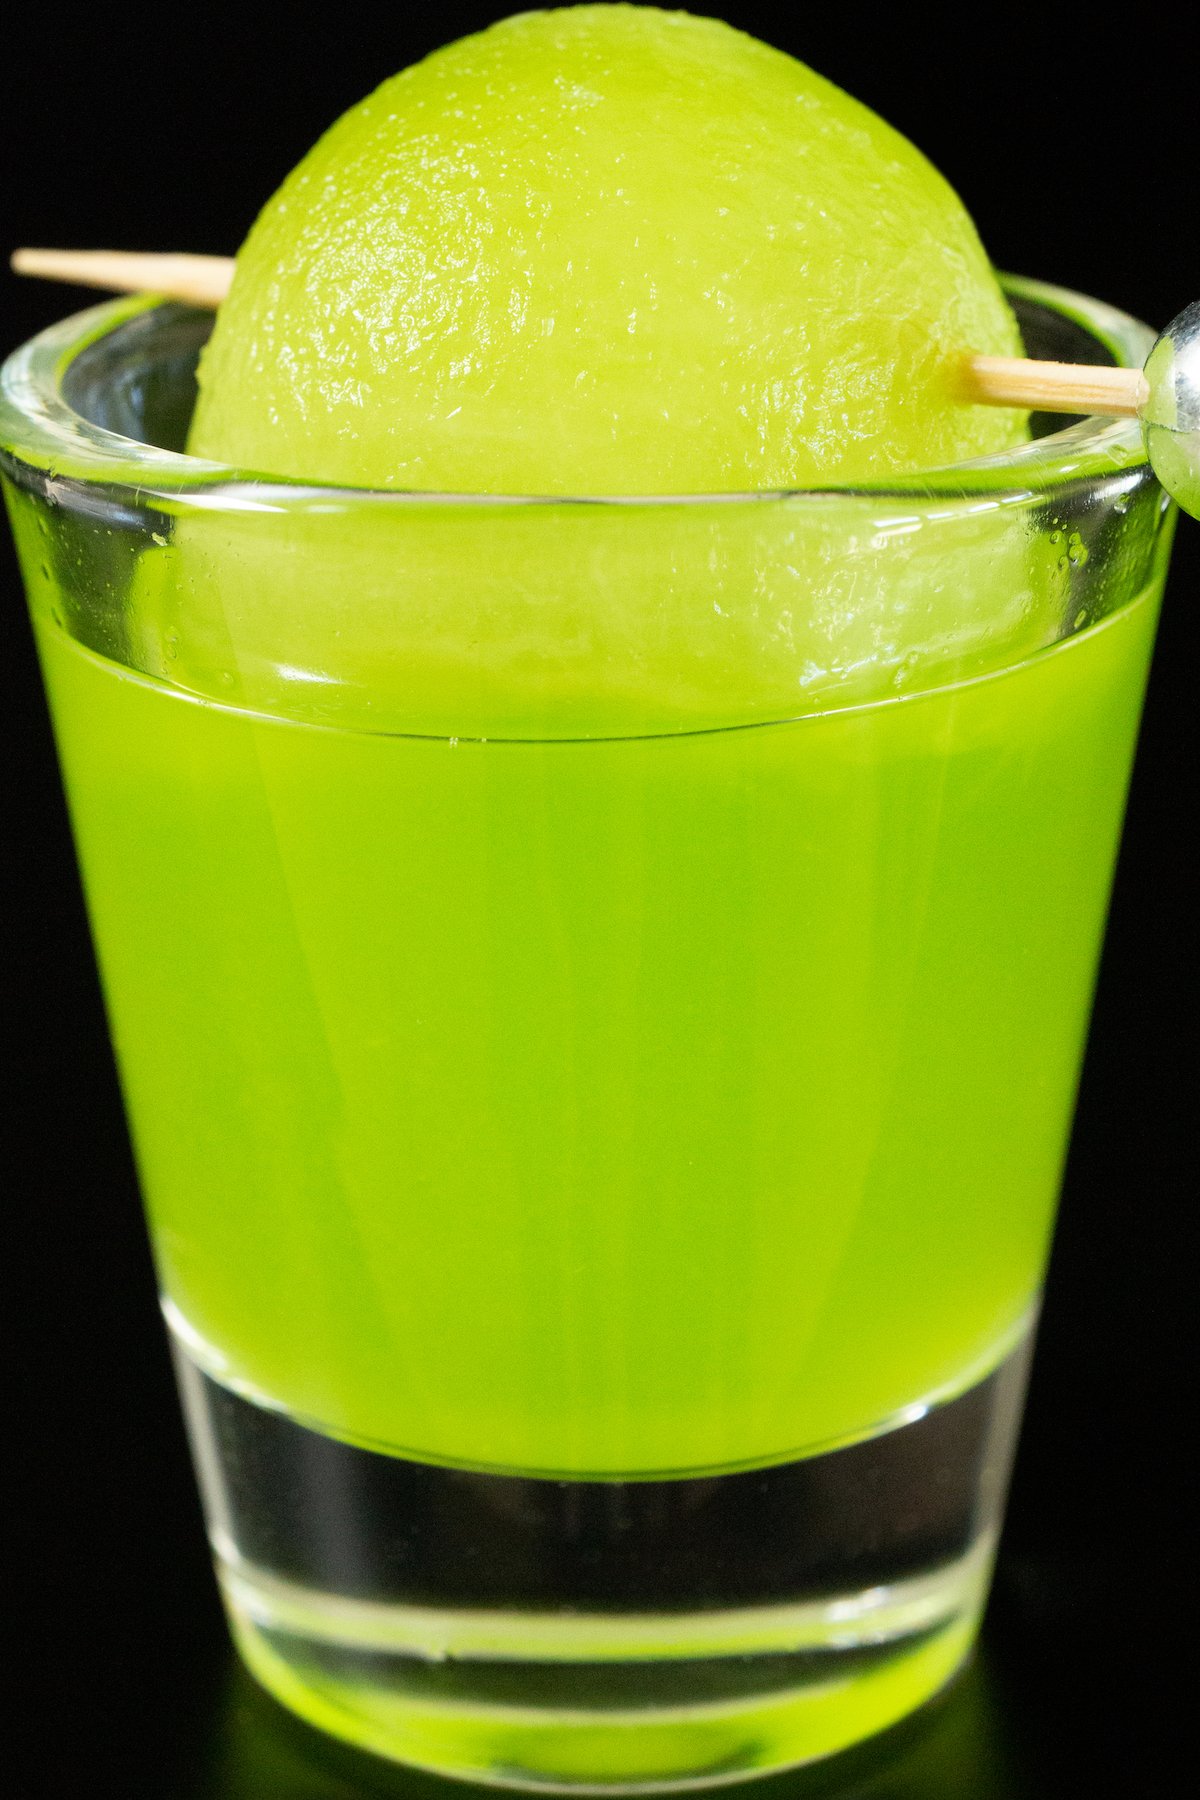 A single shot glass filled with a bright green melon ball shot, garnished with a honeydew melon ball on a toothpick.